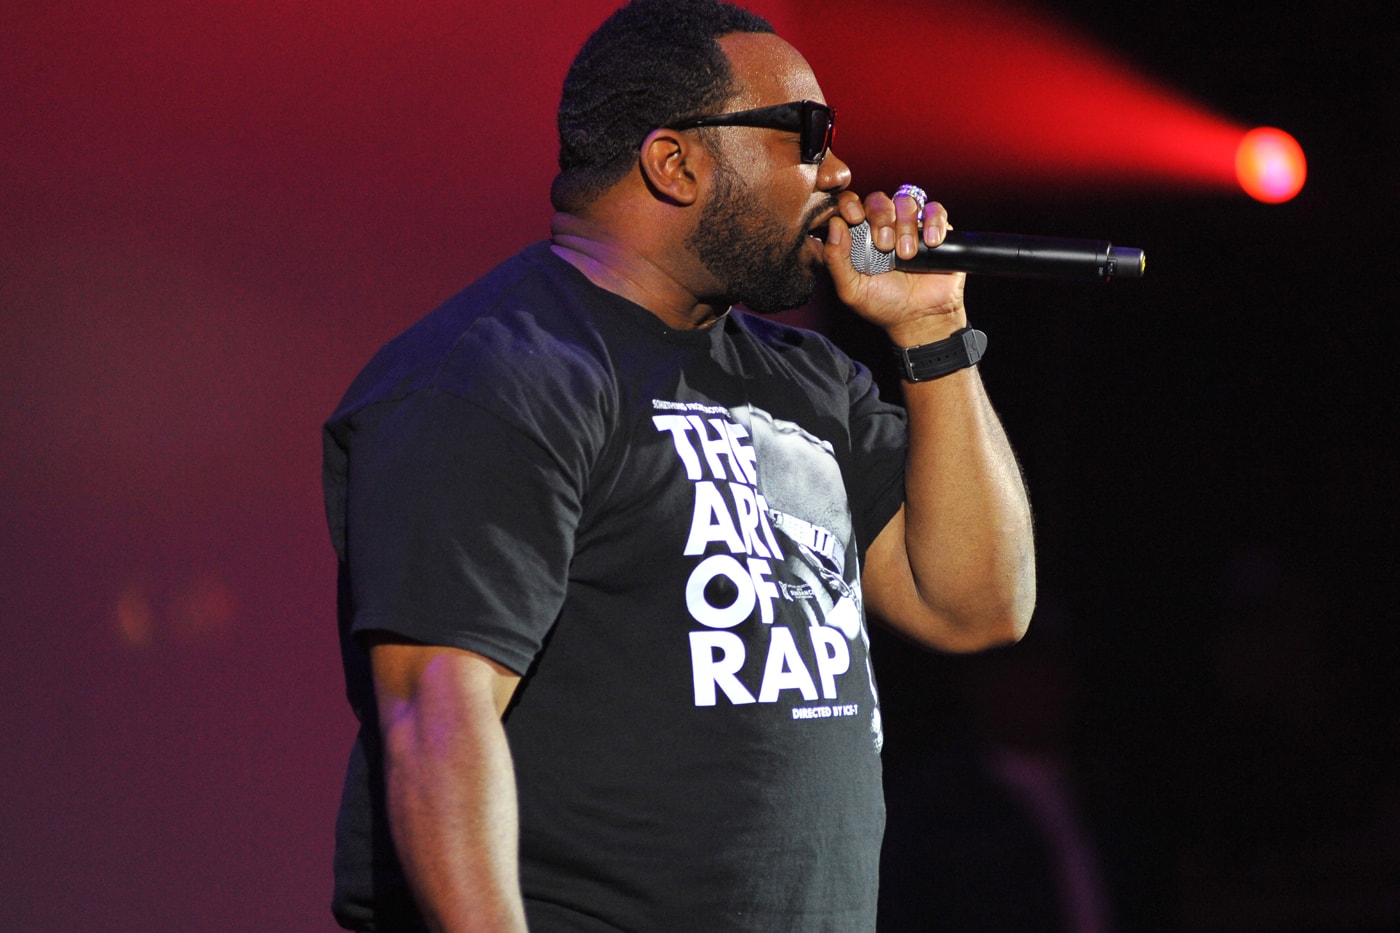 Raekwon featuring GZA, Inspectah Deck & Thea  – Rockstars (Produced by The RZA)